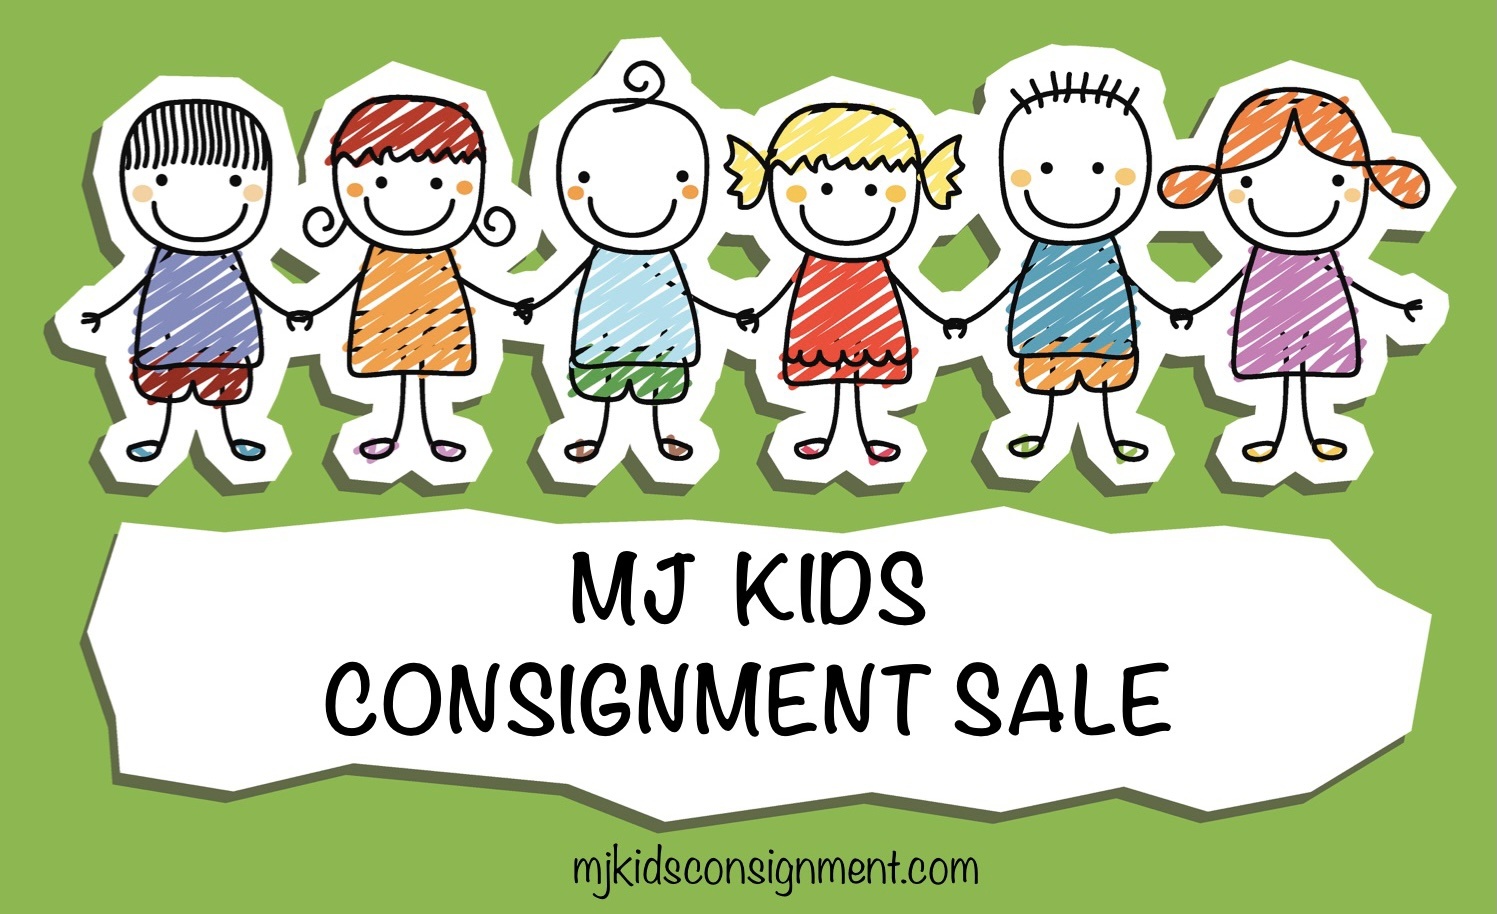 MJ Kids Spring/Summer Consignment Sale